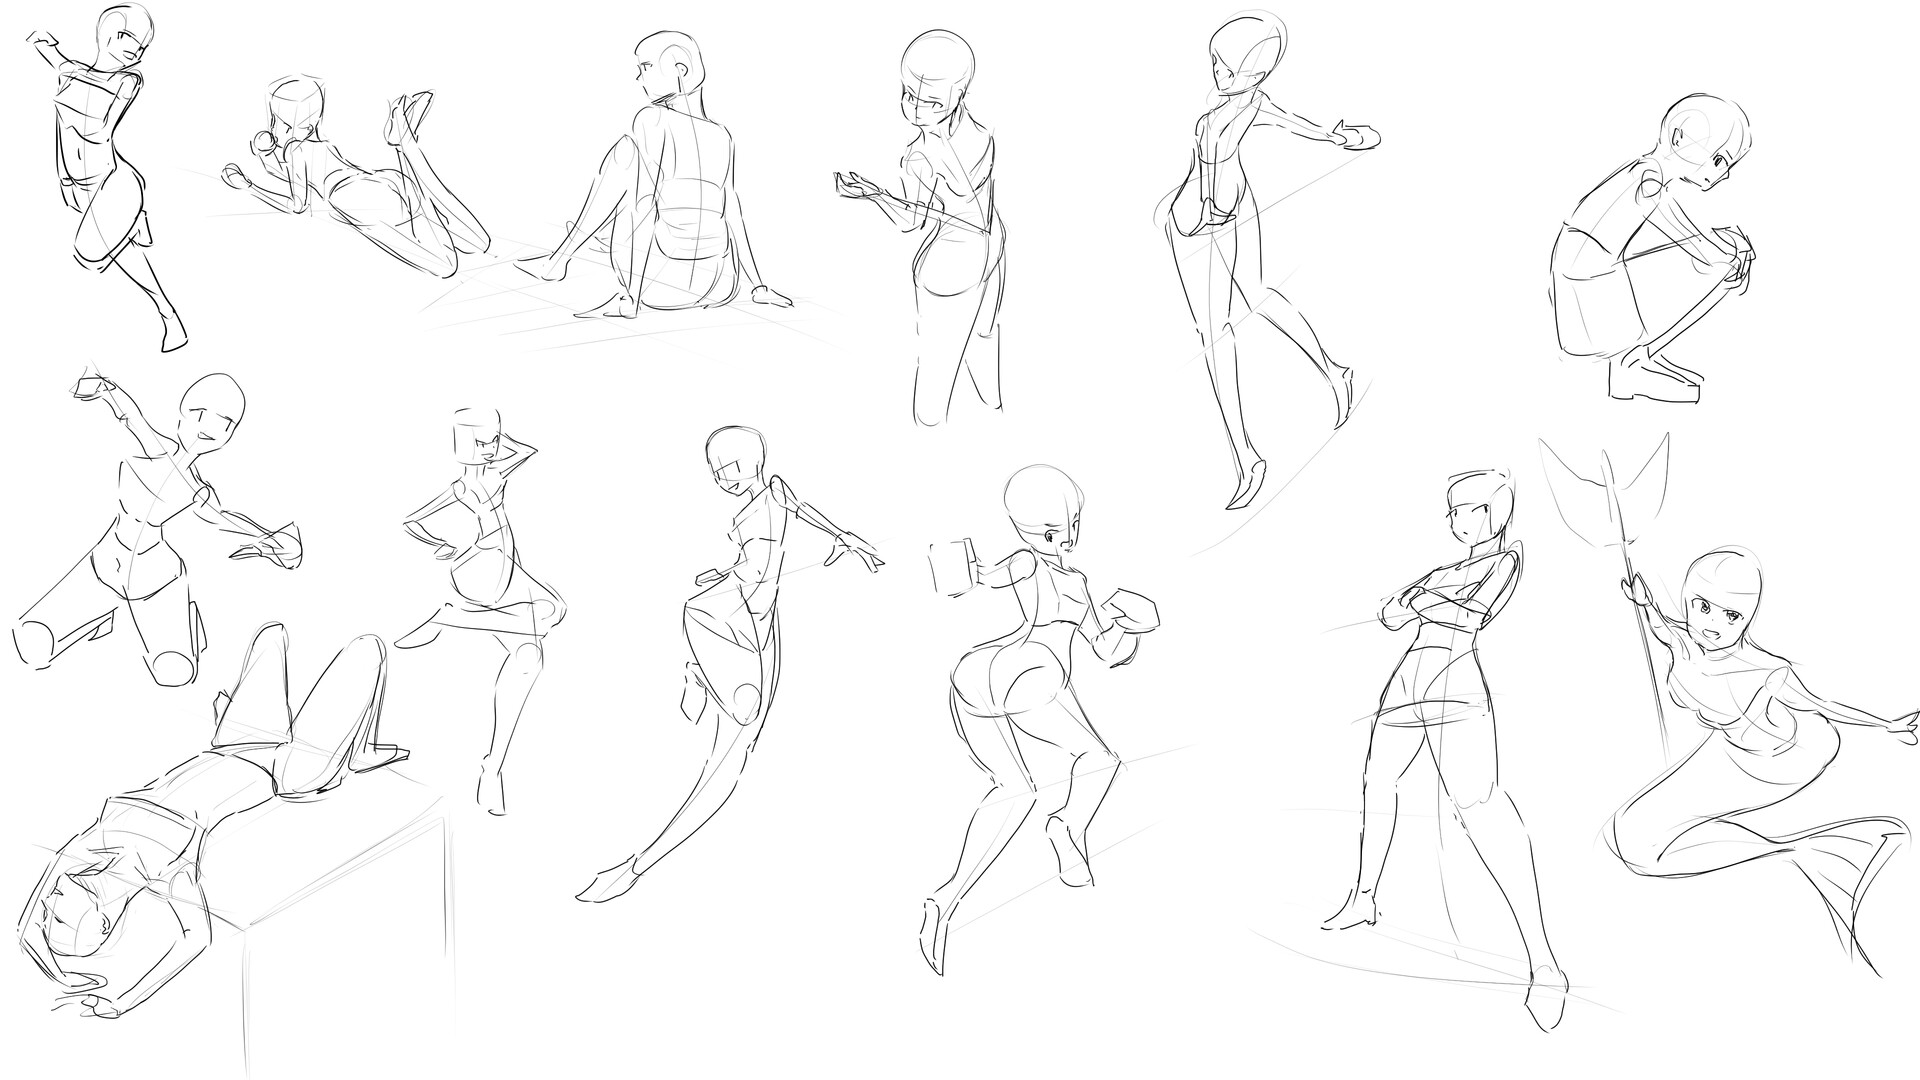 Sumo - Works - Pose references